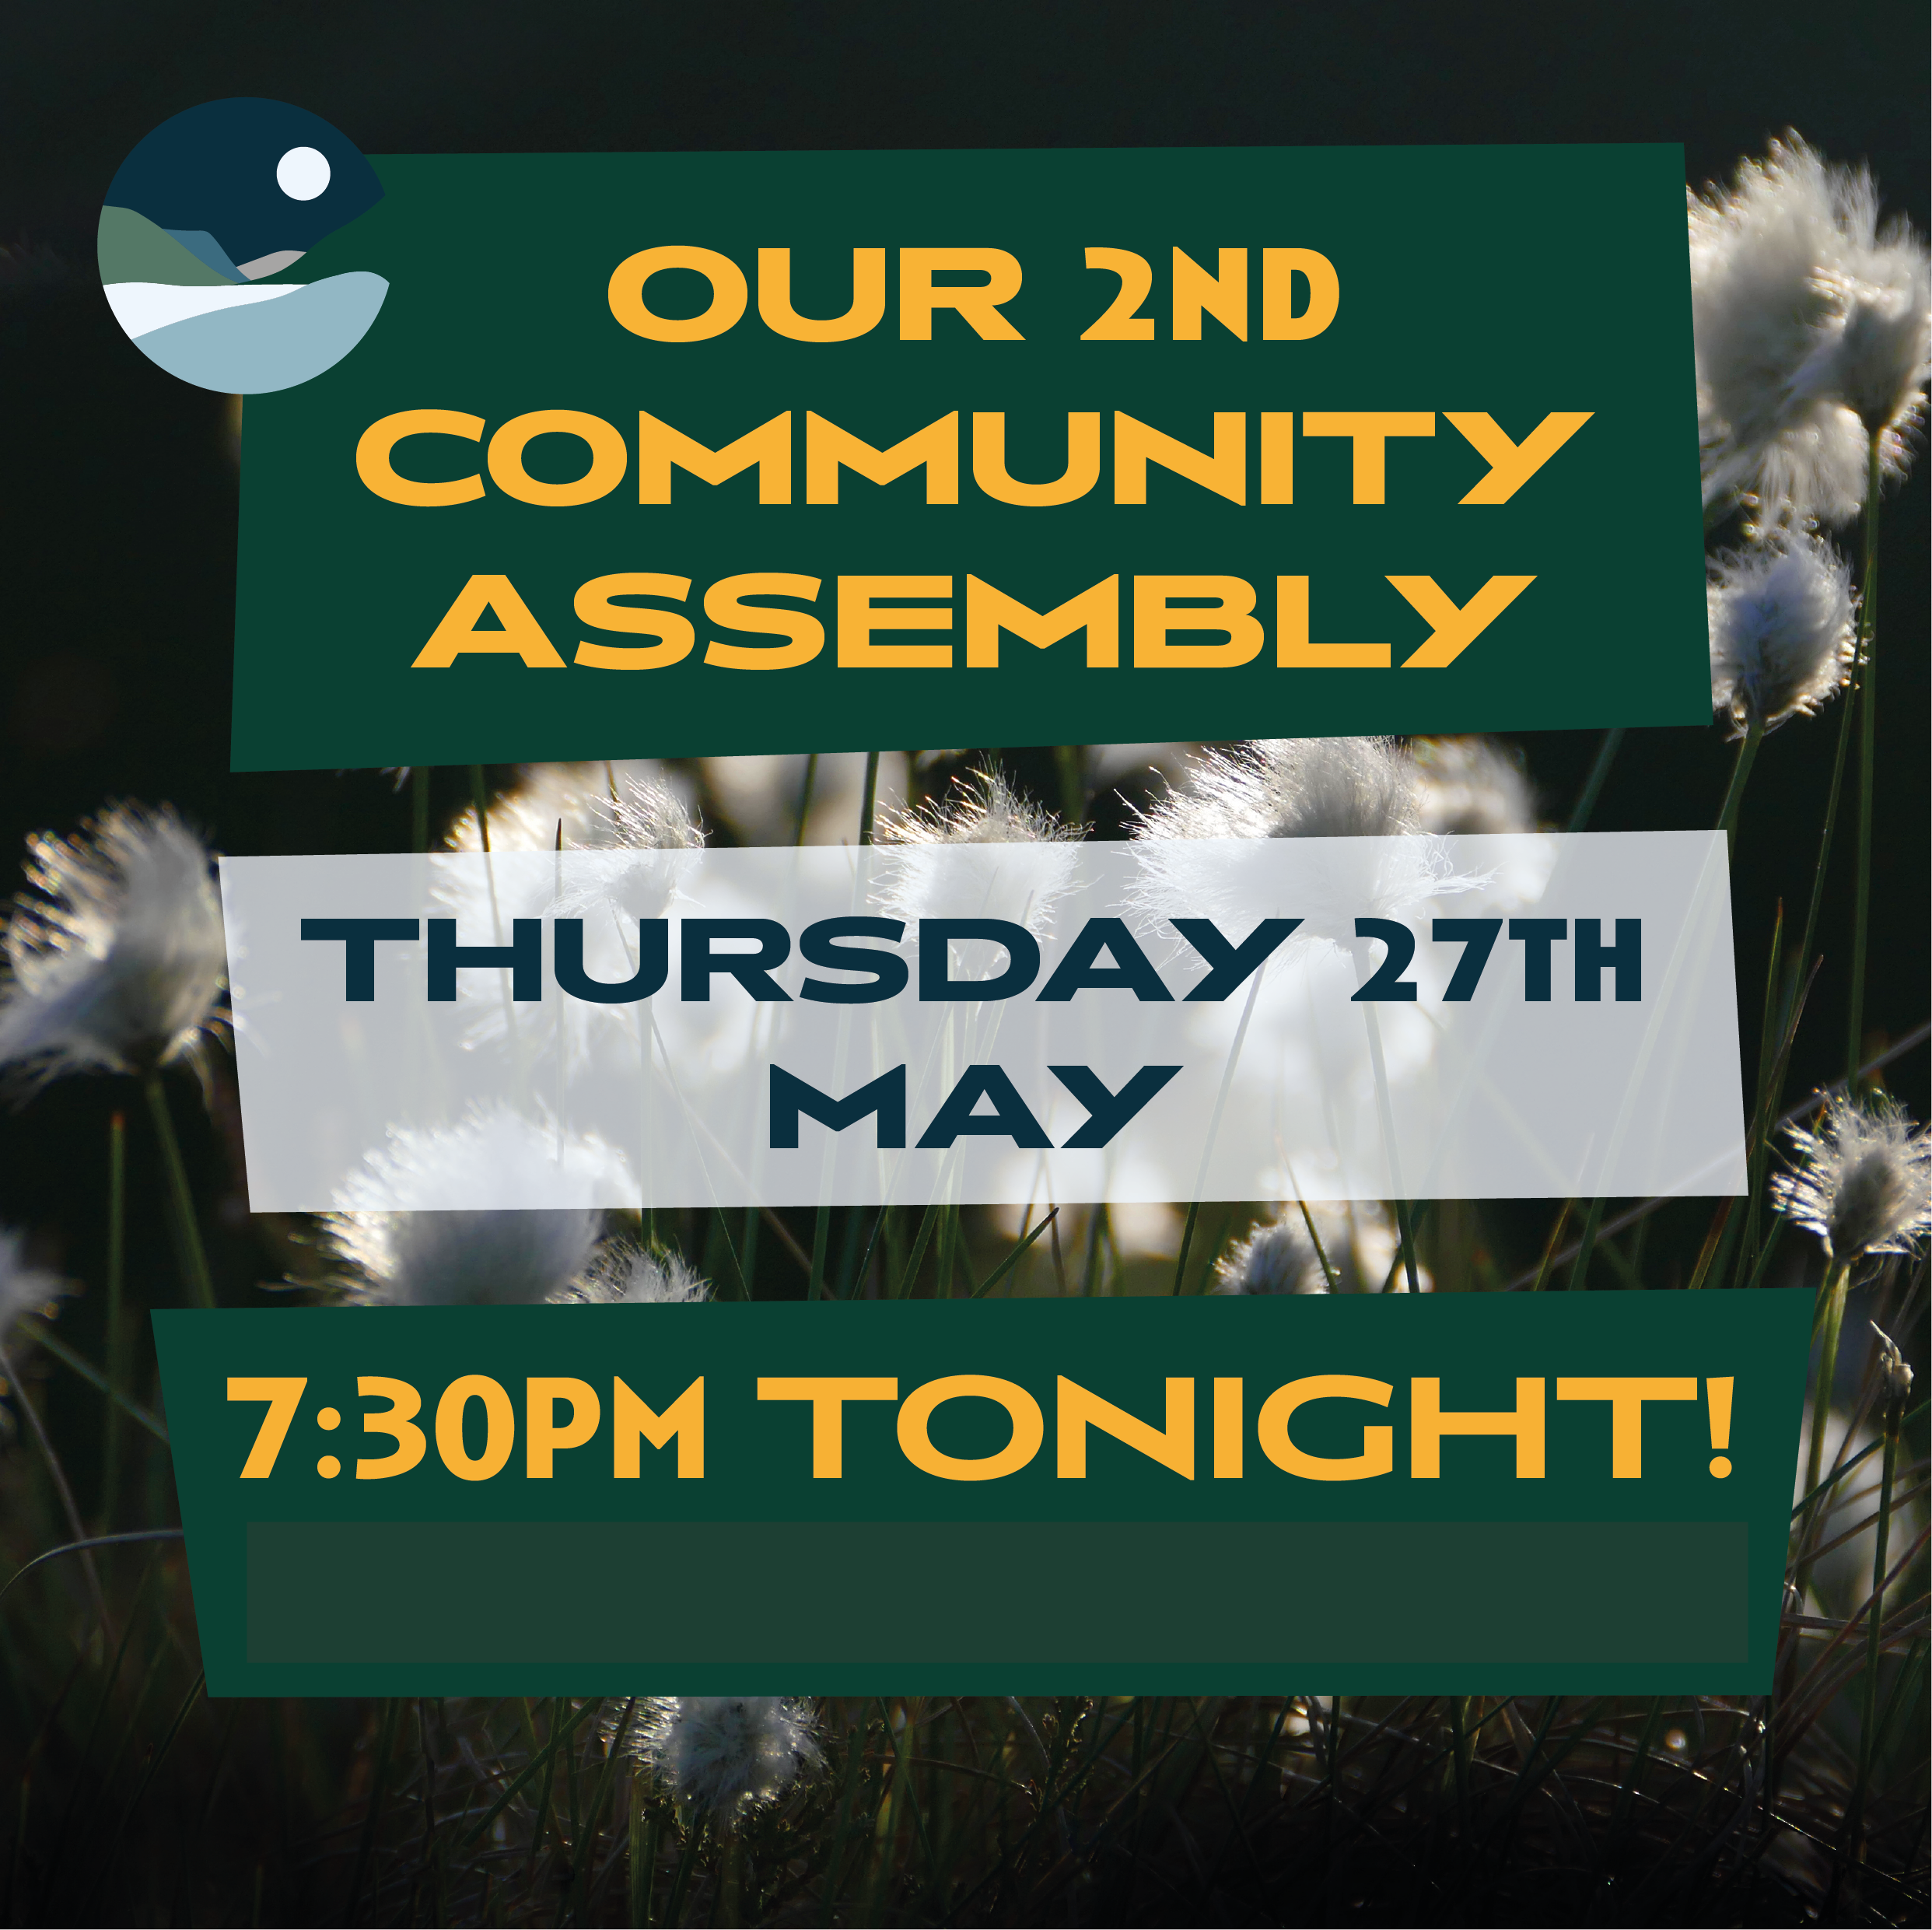 Tonight! community assembly - how to join